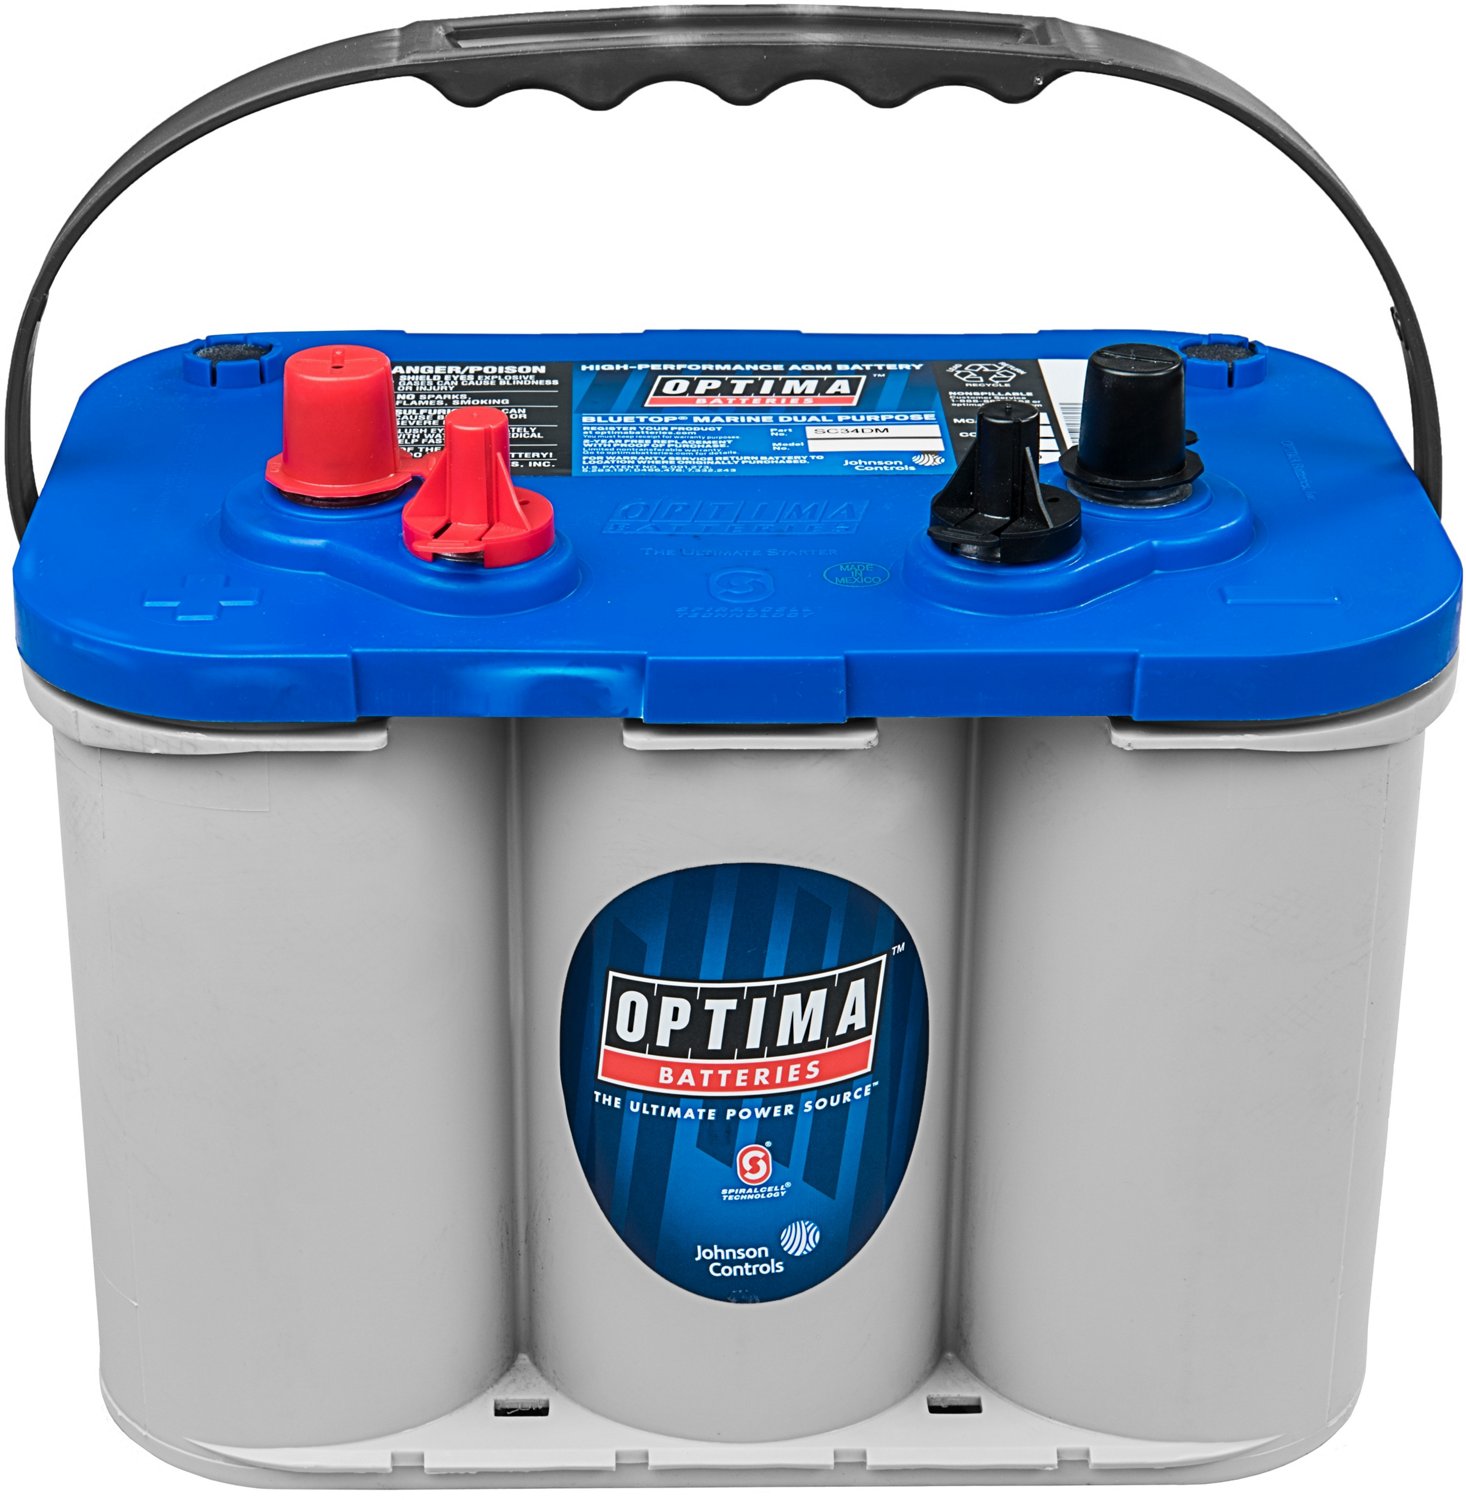 Bonde cafeteria næse OPTIMA® BlueTop D34M Marine Battery | Free Shipping at Academy